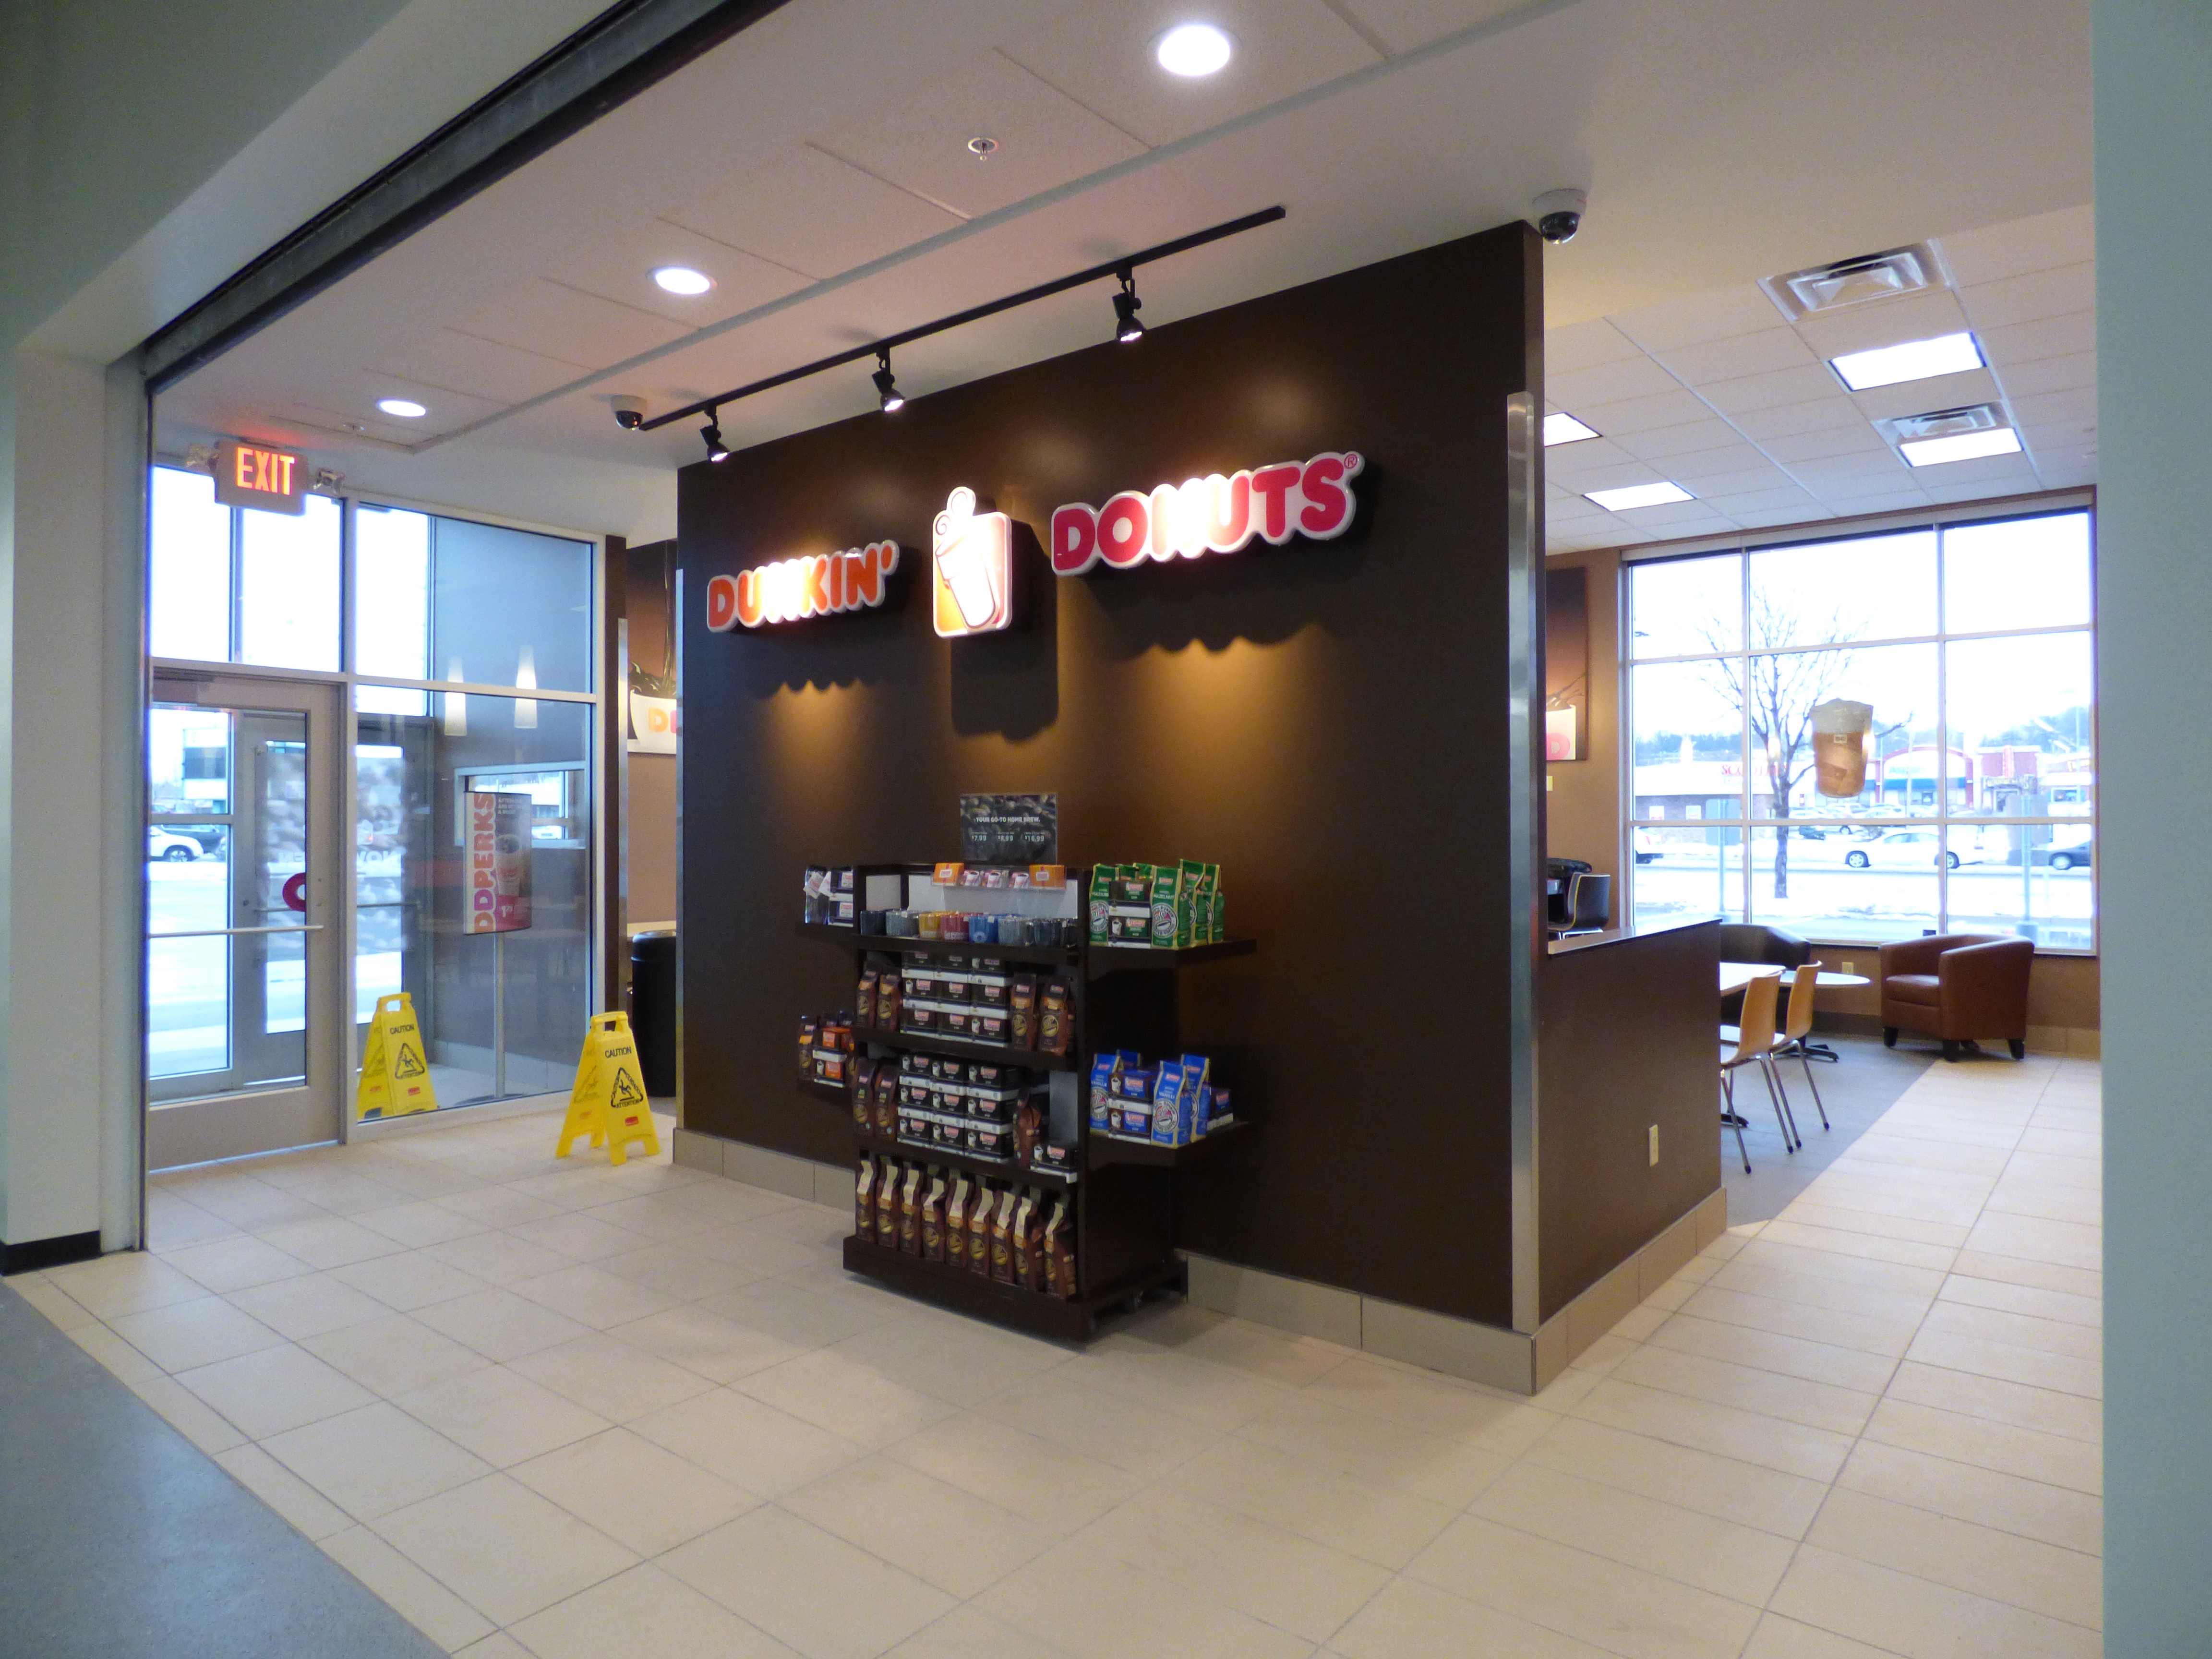 The Do Space Dunkin’ is now open!